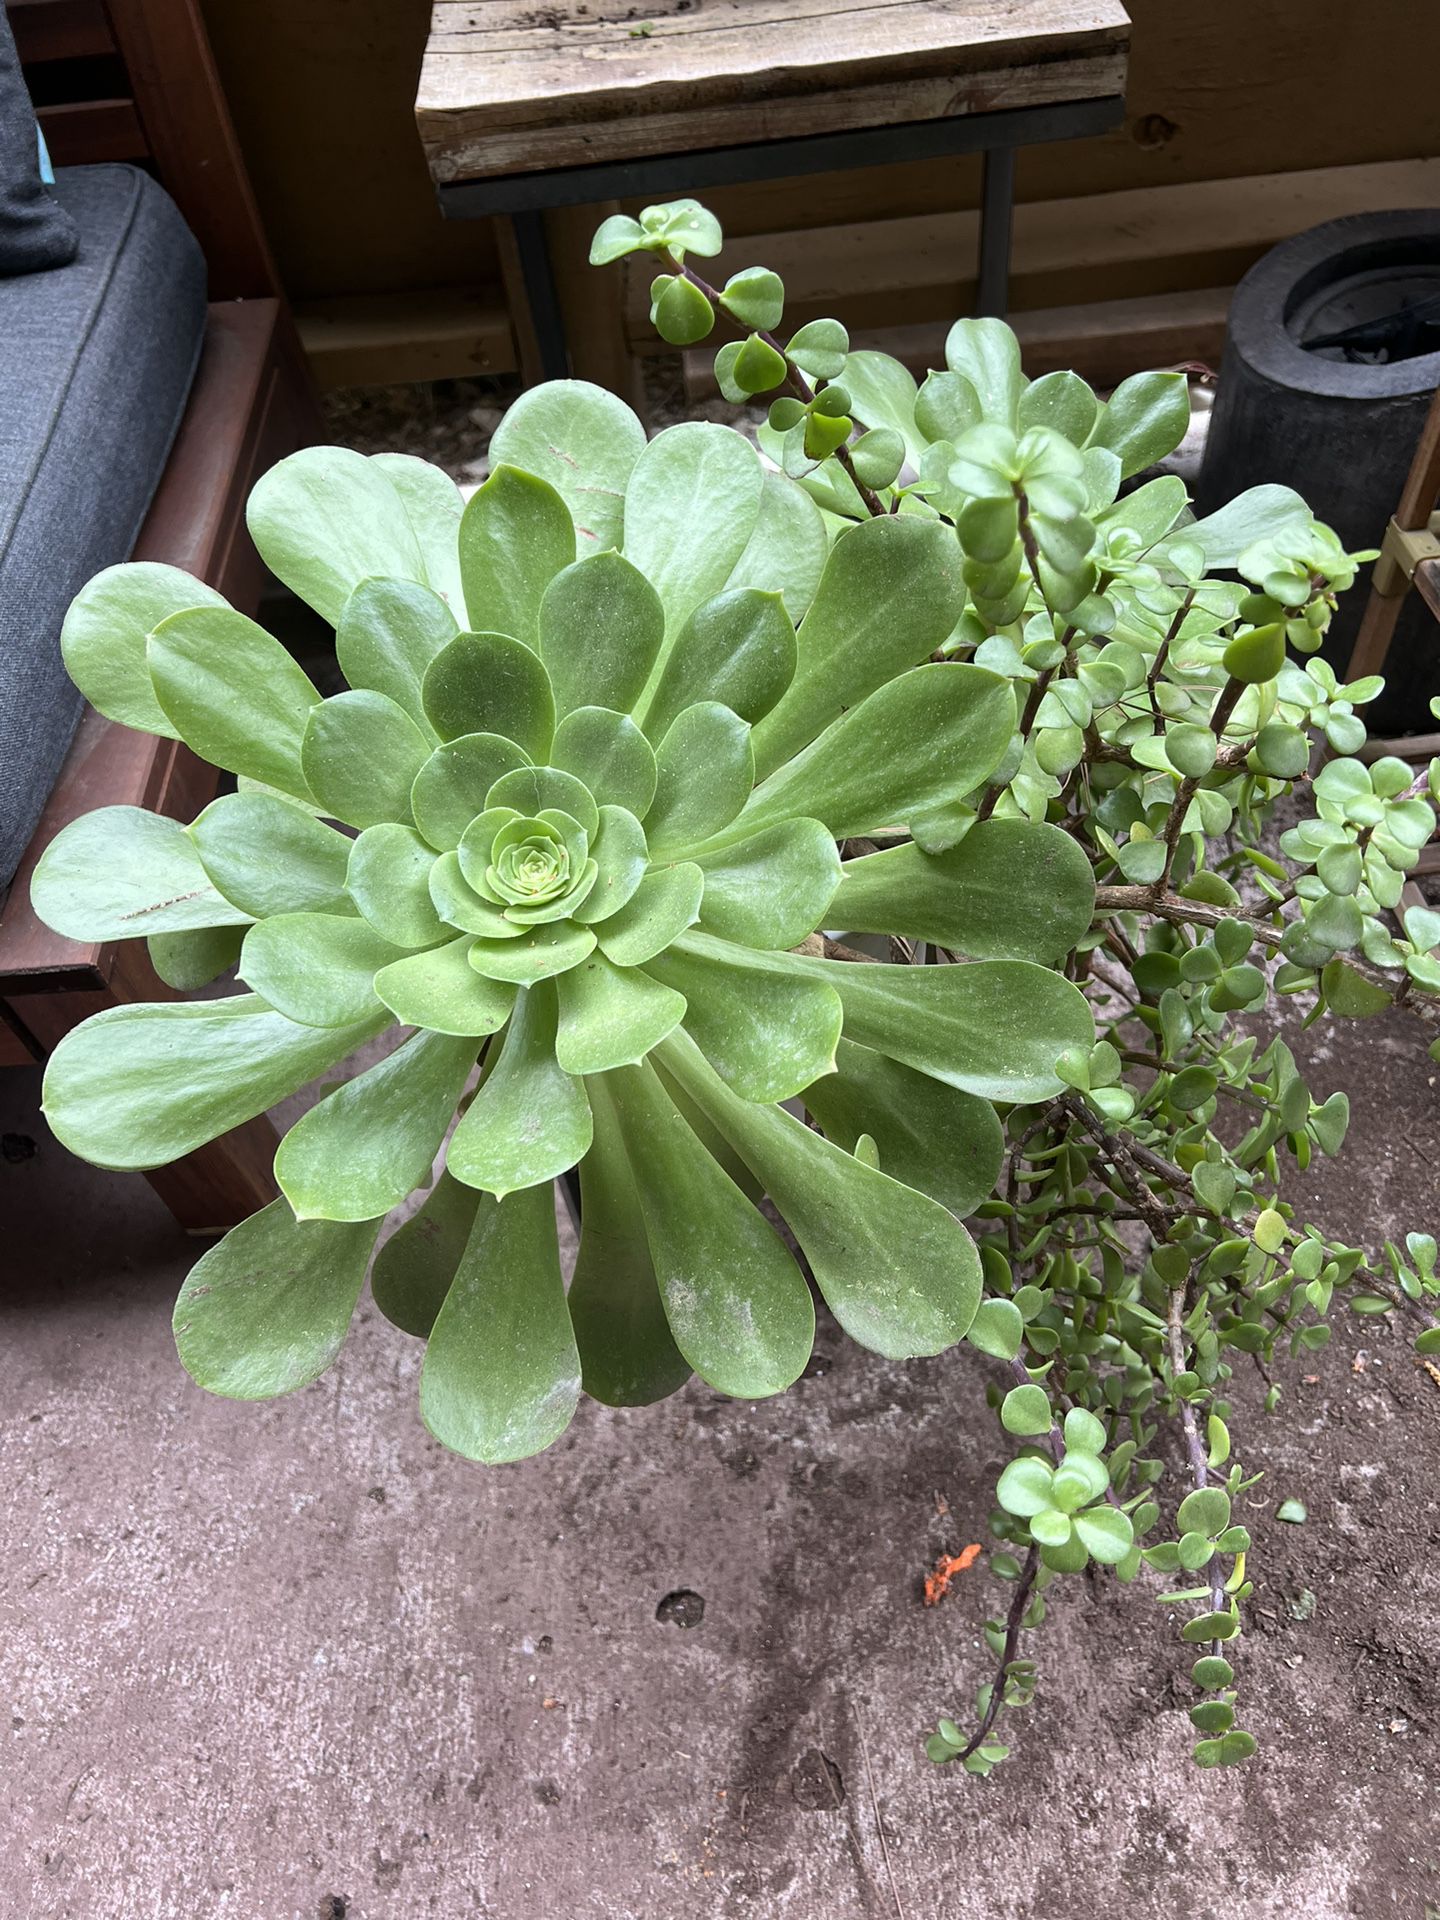 3 Separate Pots With Succulents